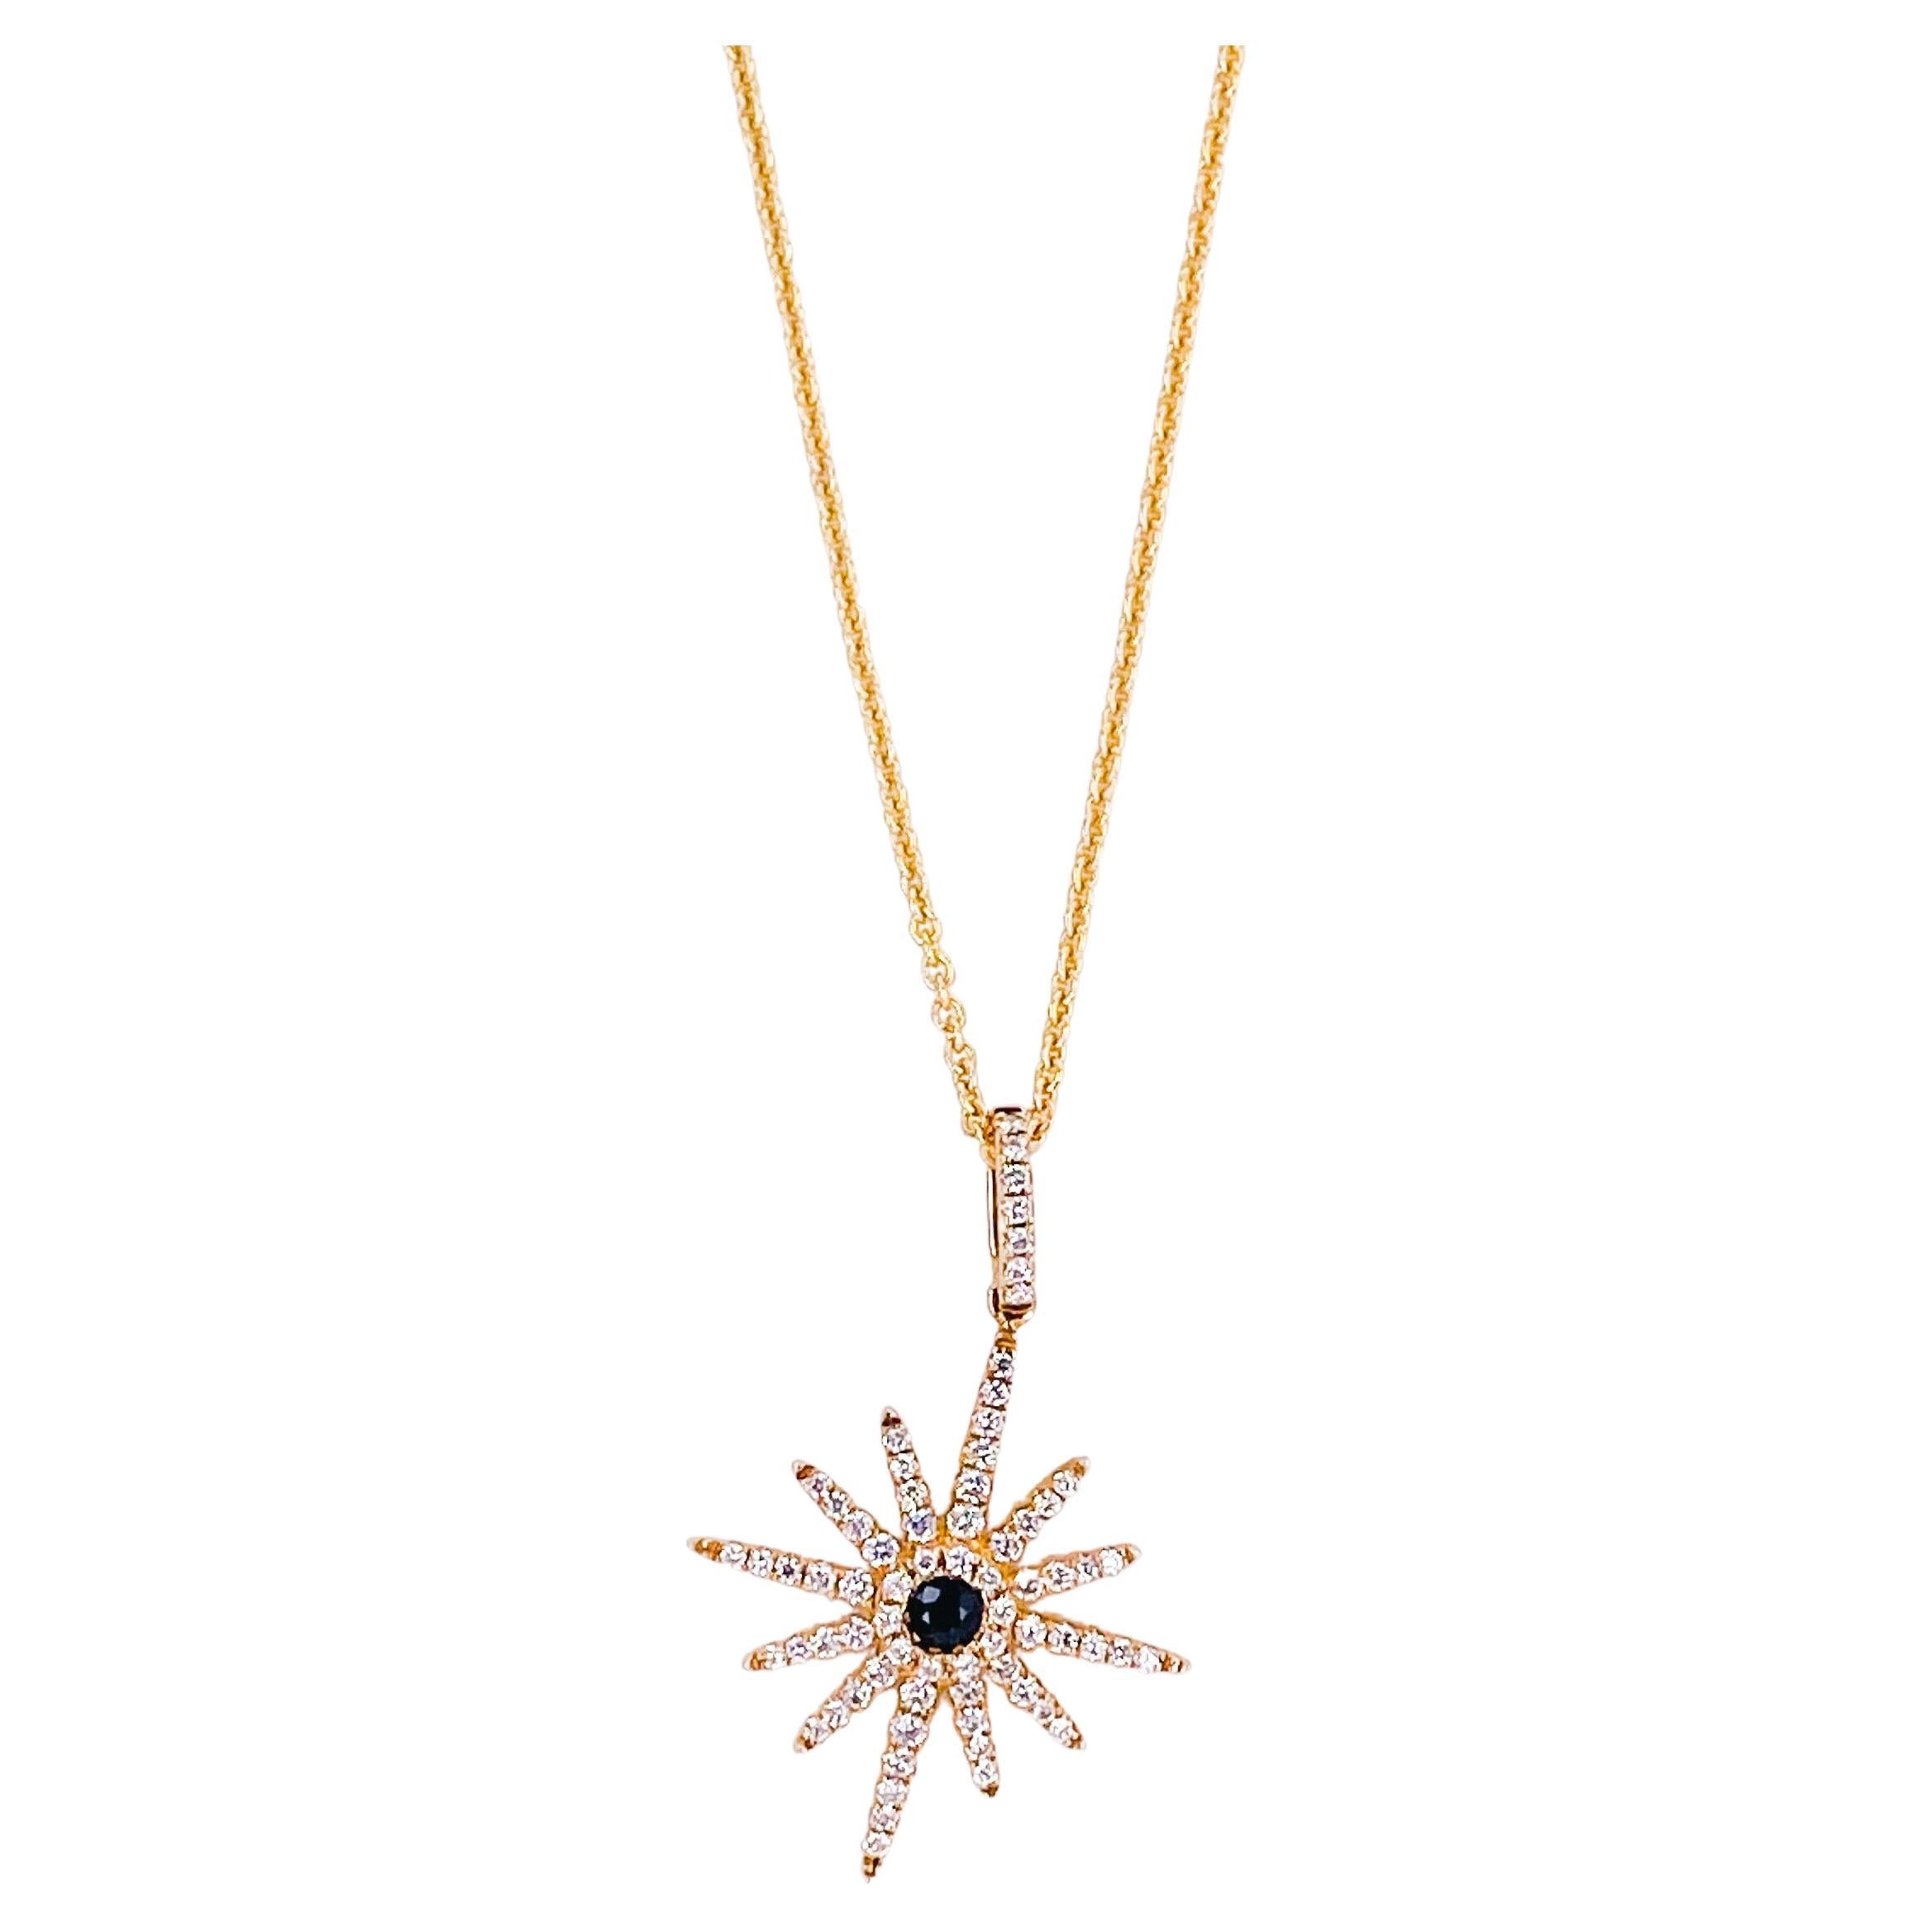 The miracle of life is pictured in this star bright pendant. A miracle in the making, this hand made North Star pendant and chain will beautify any neckline. There is one genuine blue sapphire in the center and over 50 diamonds accenting the design.